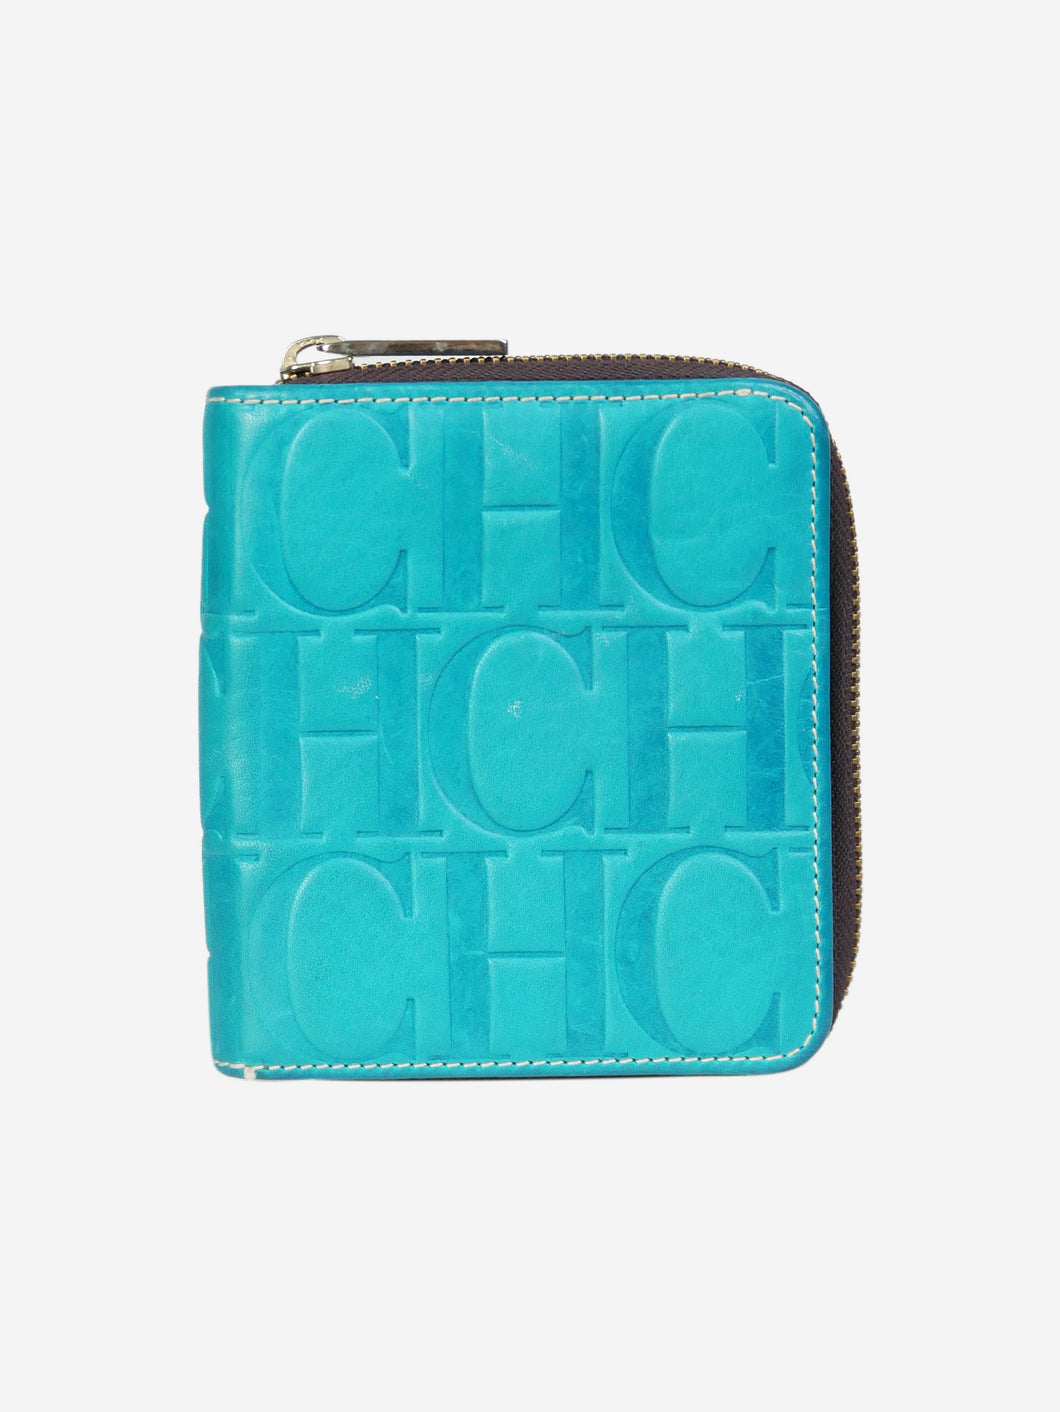 Blue branded monogram wallet Wallets, Purses & Small Leather Goods Chloe 